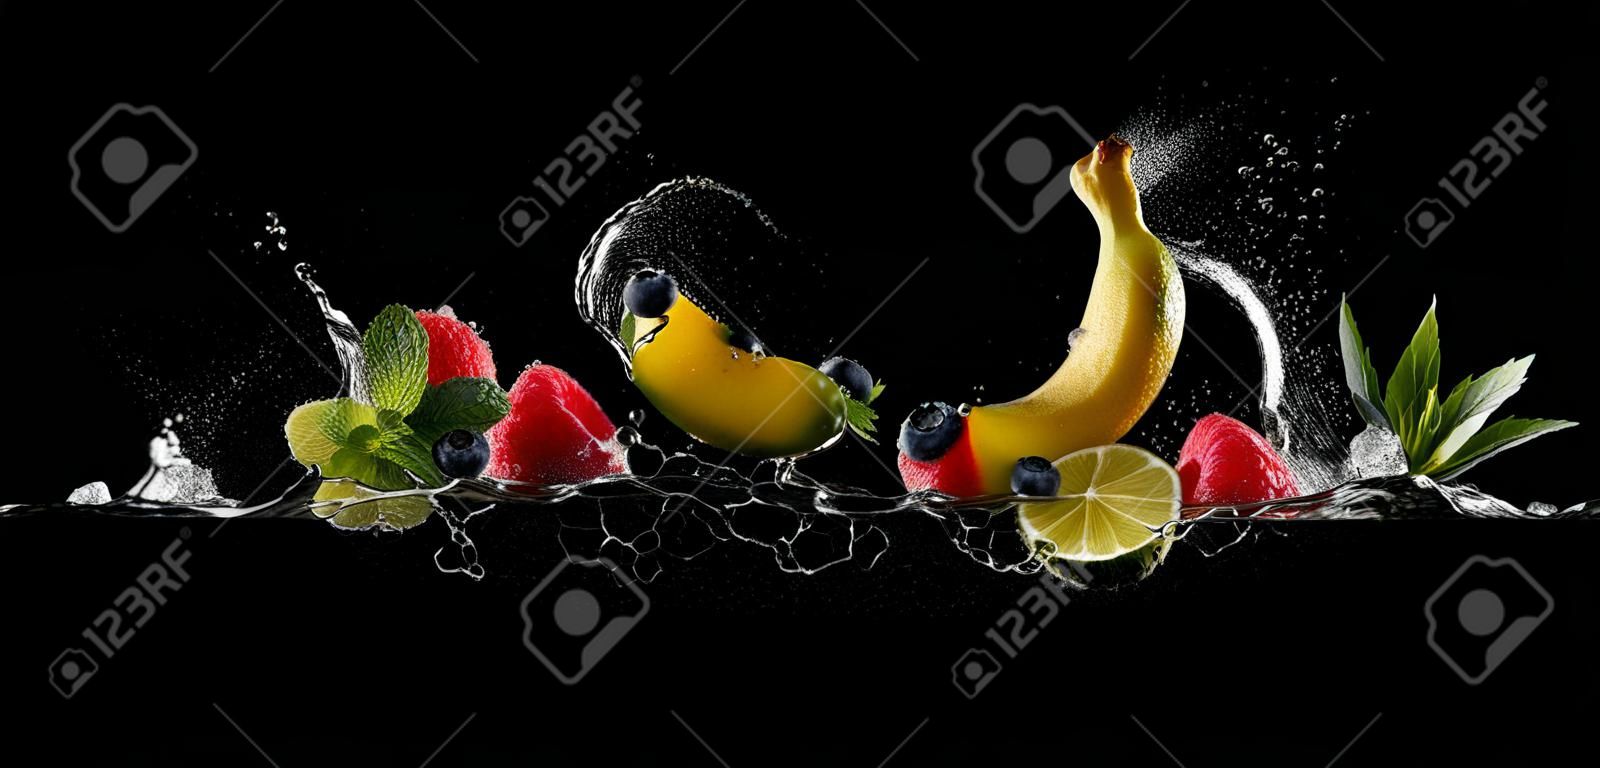 Pieces of fruit with mint leaves and ice cubes, falling in water splash, isolated on black background.